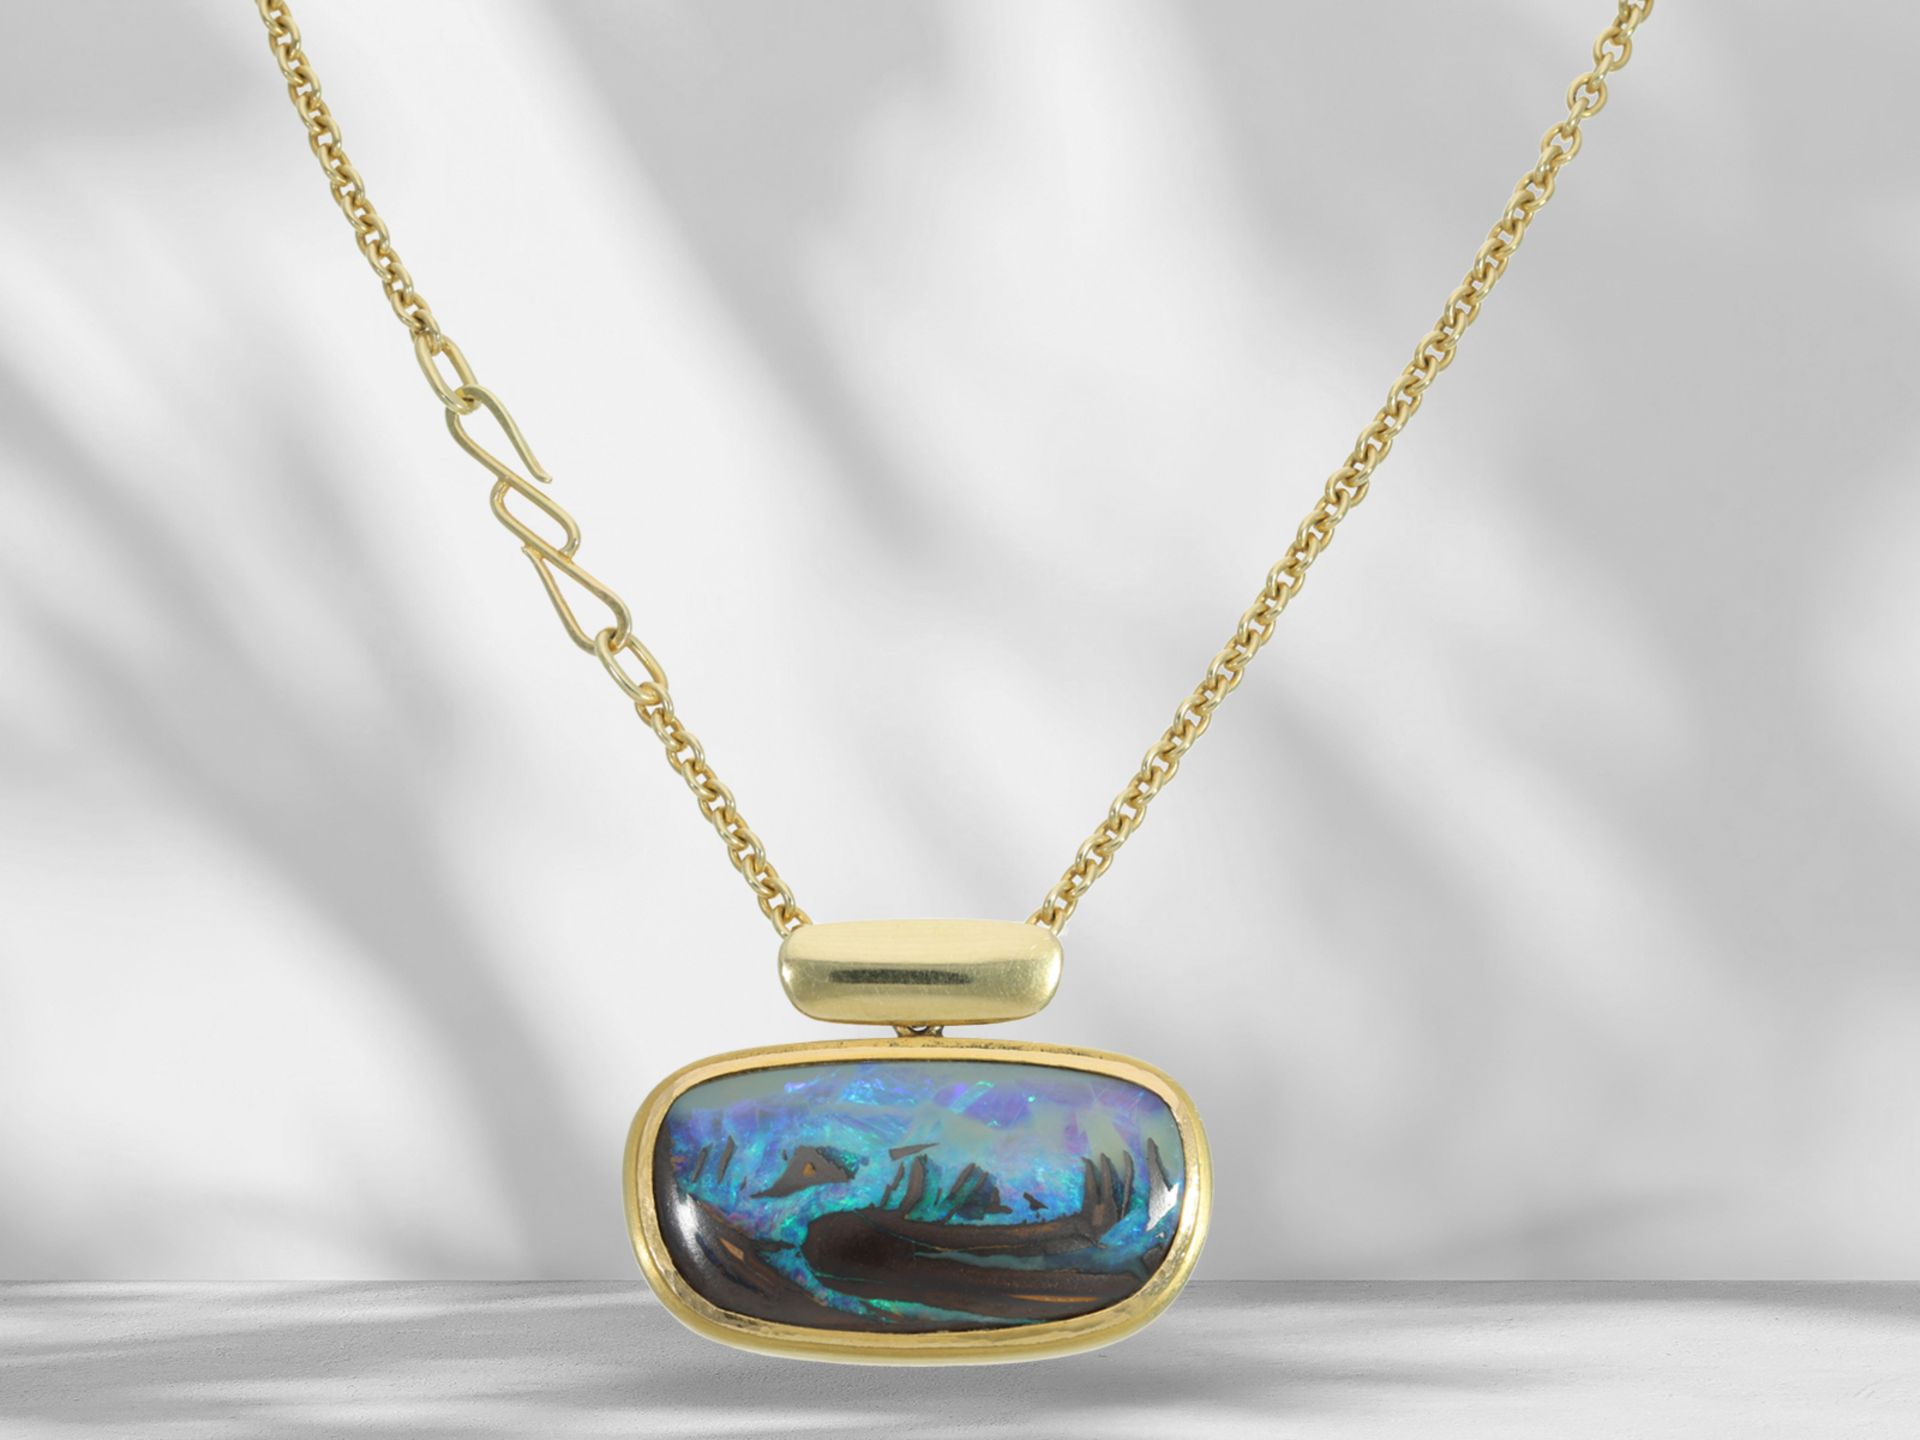 Chain/necklace: necklace with handmade vintage opal goldsmith pendant - Image 2 of 3